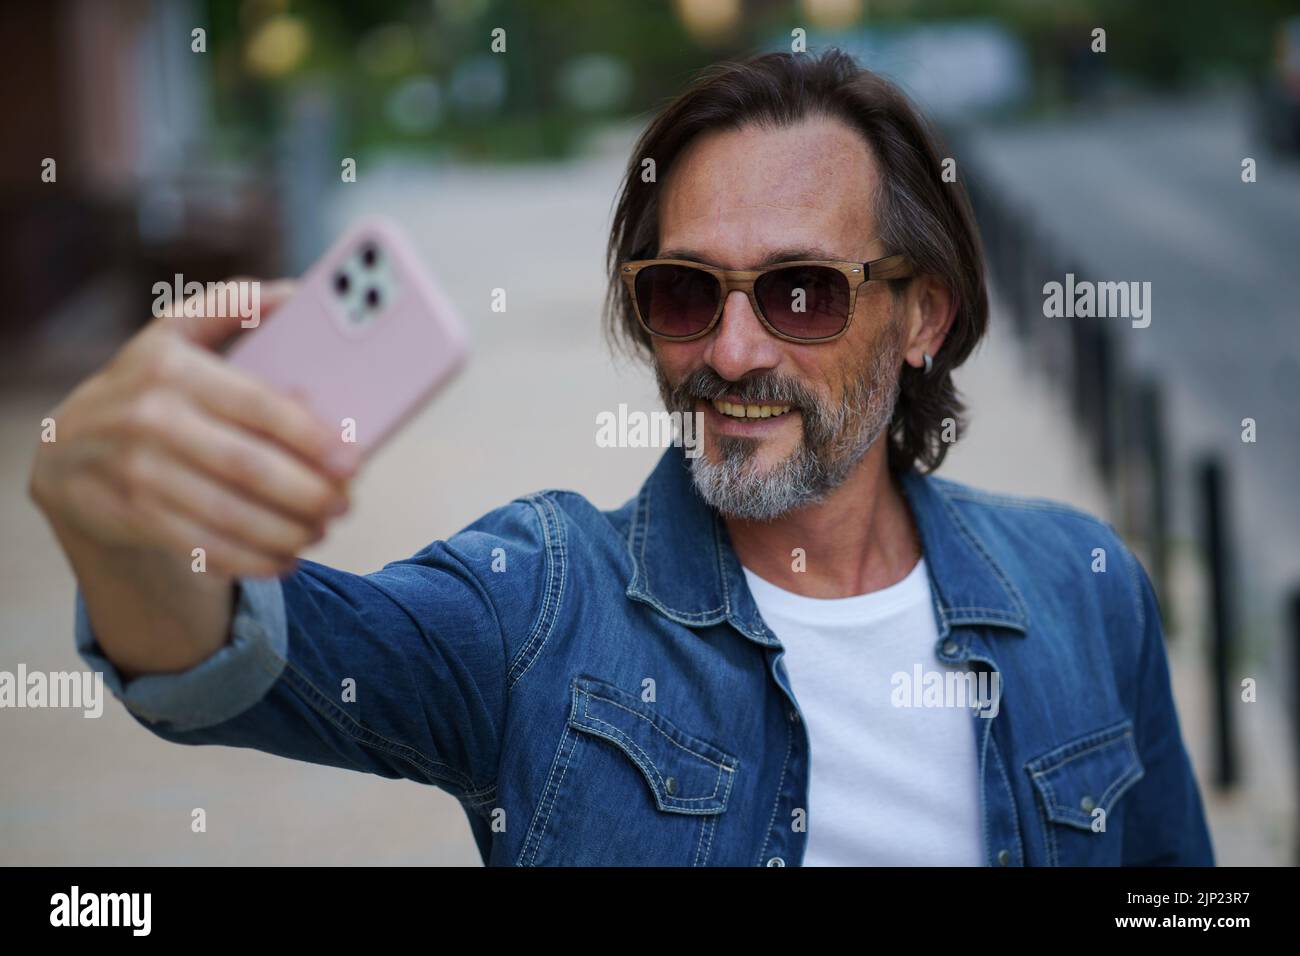 Man with smartphone outdoors making selfie or recording video message wearing denim shirt and sunglasses. Handsome middle aged man with grey hair making photos while traveling.  Stock Photo